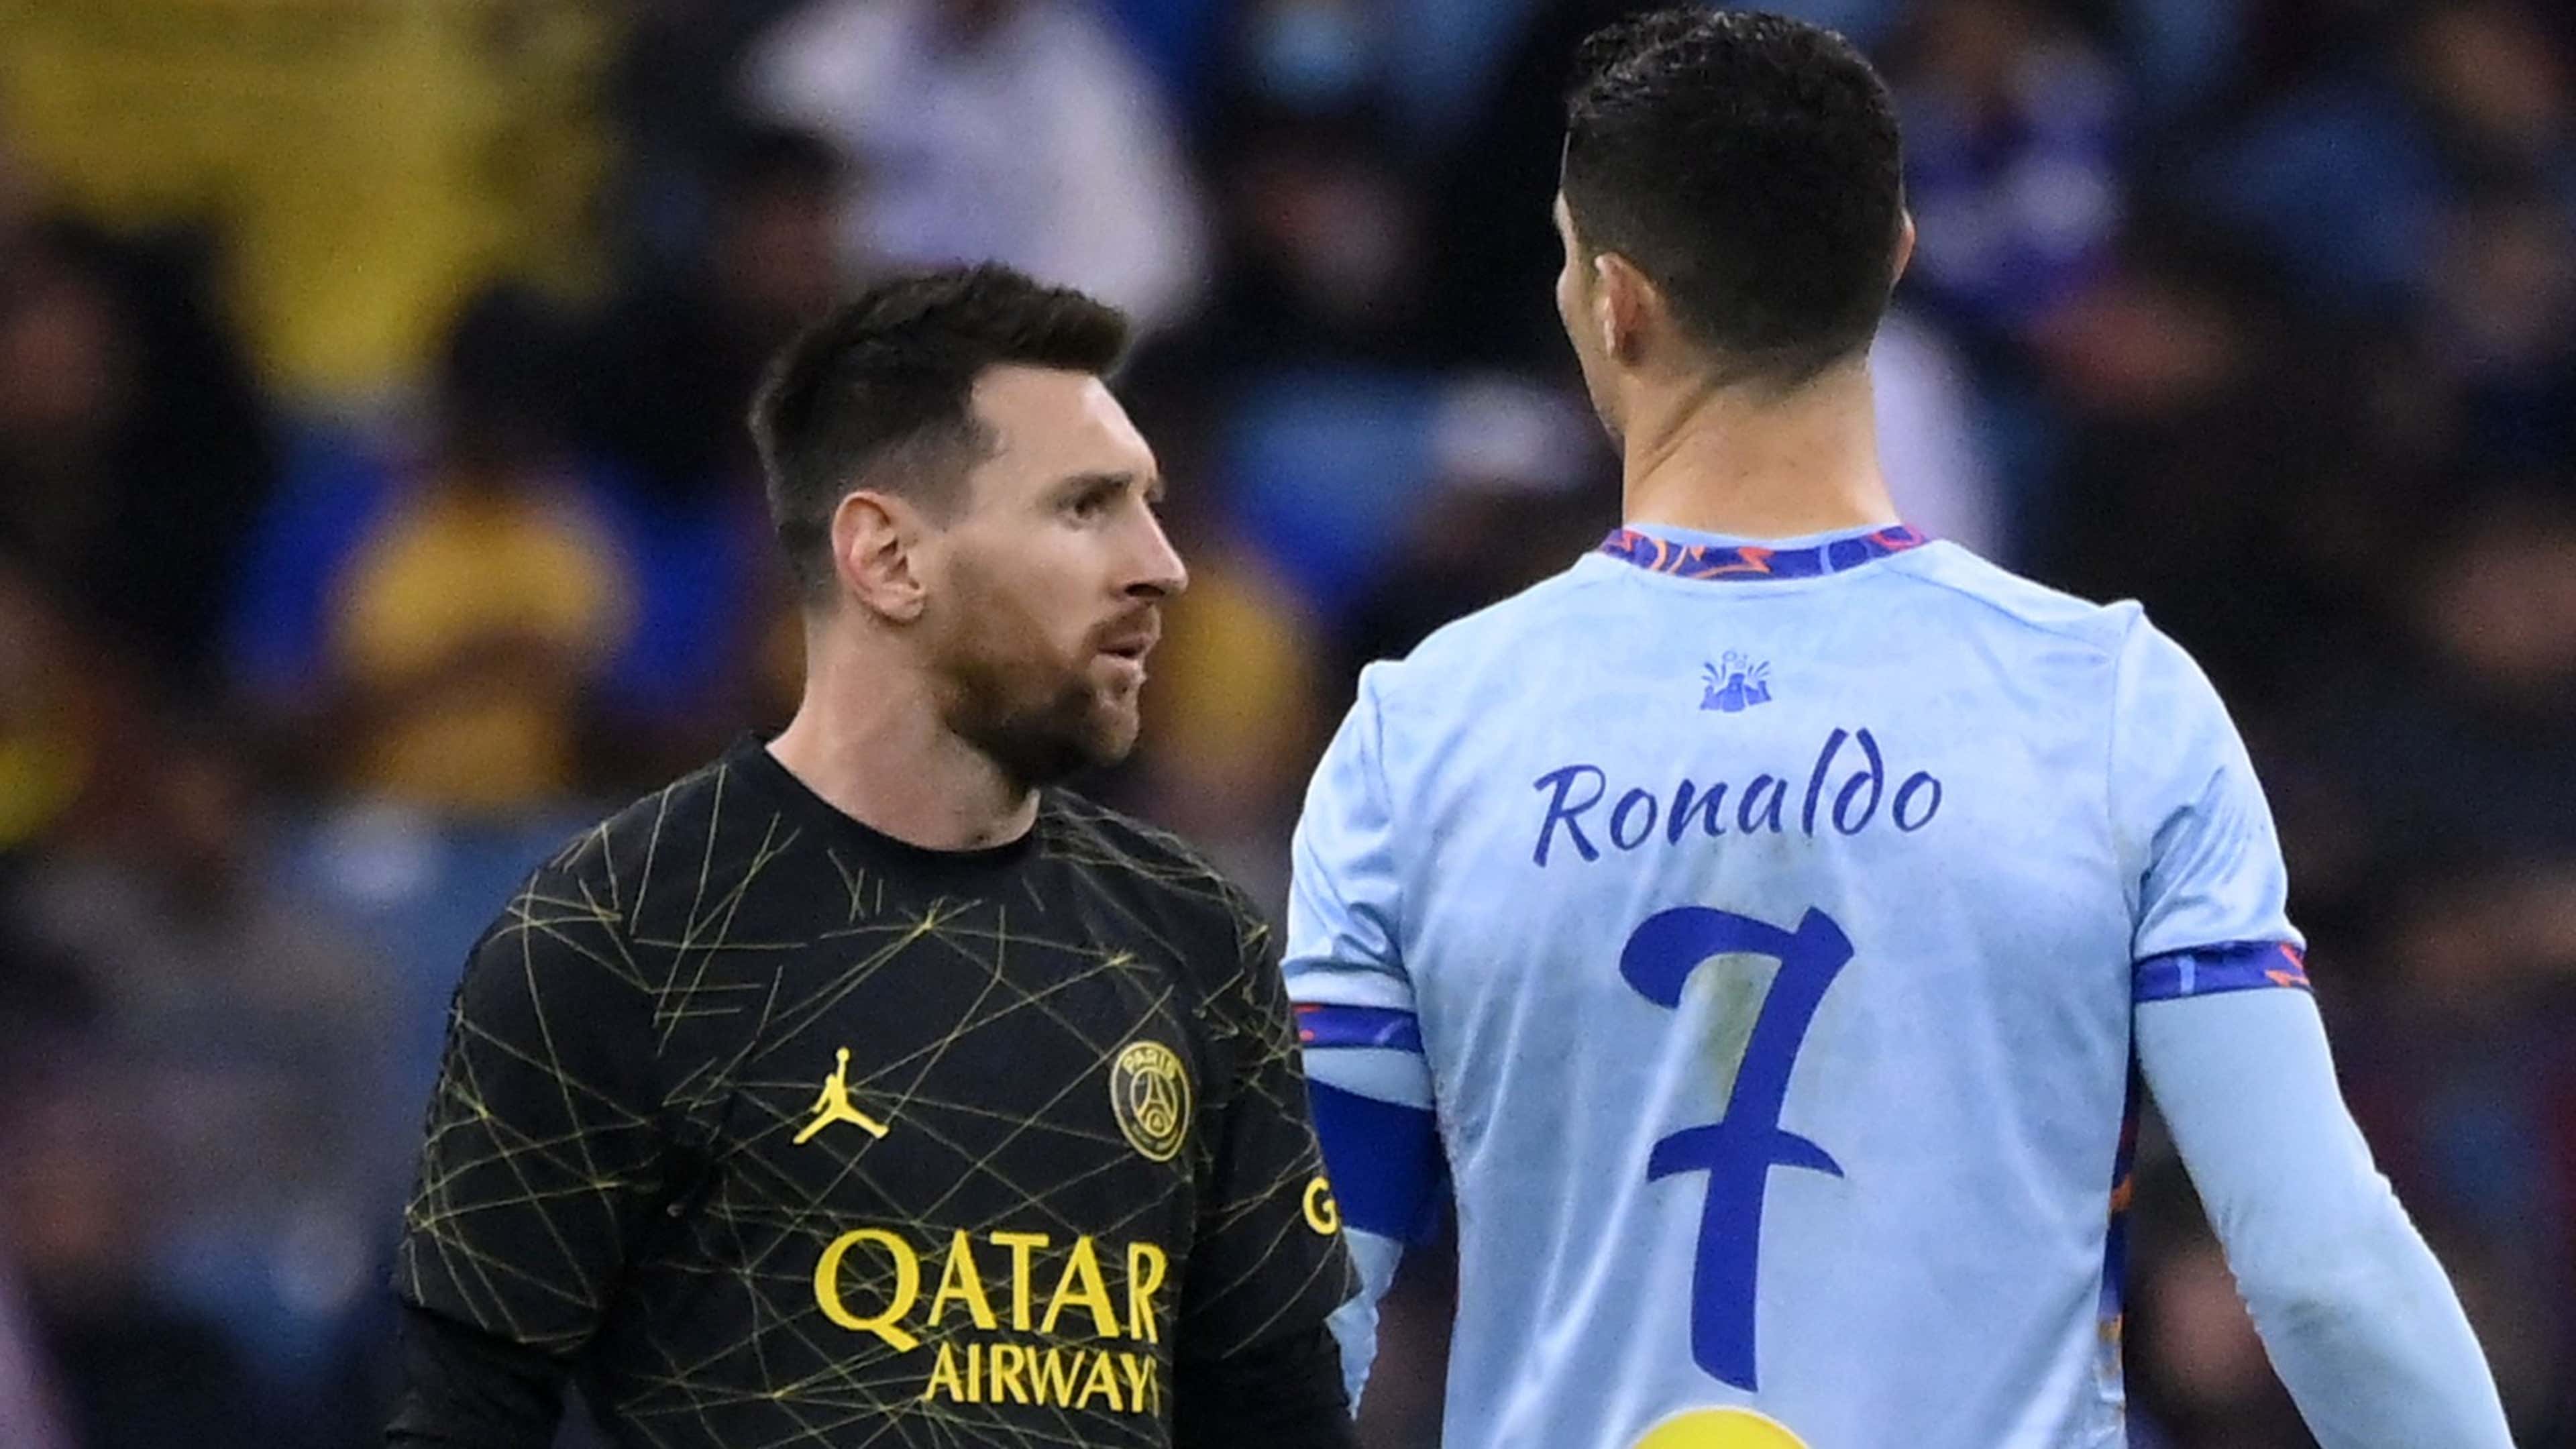 How much did Lionel Messi and Cristiano Ronaldo charge